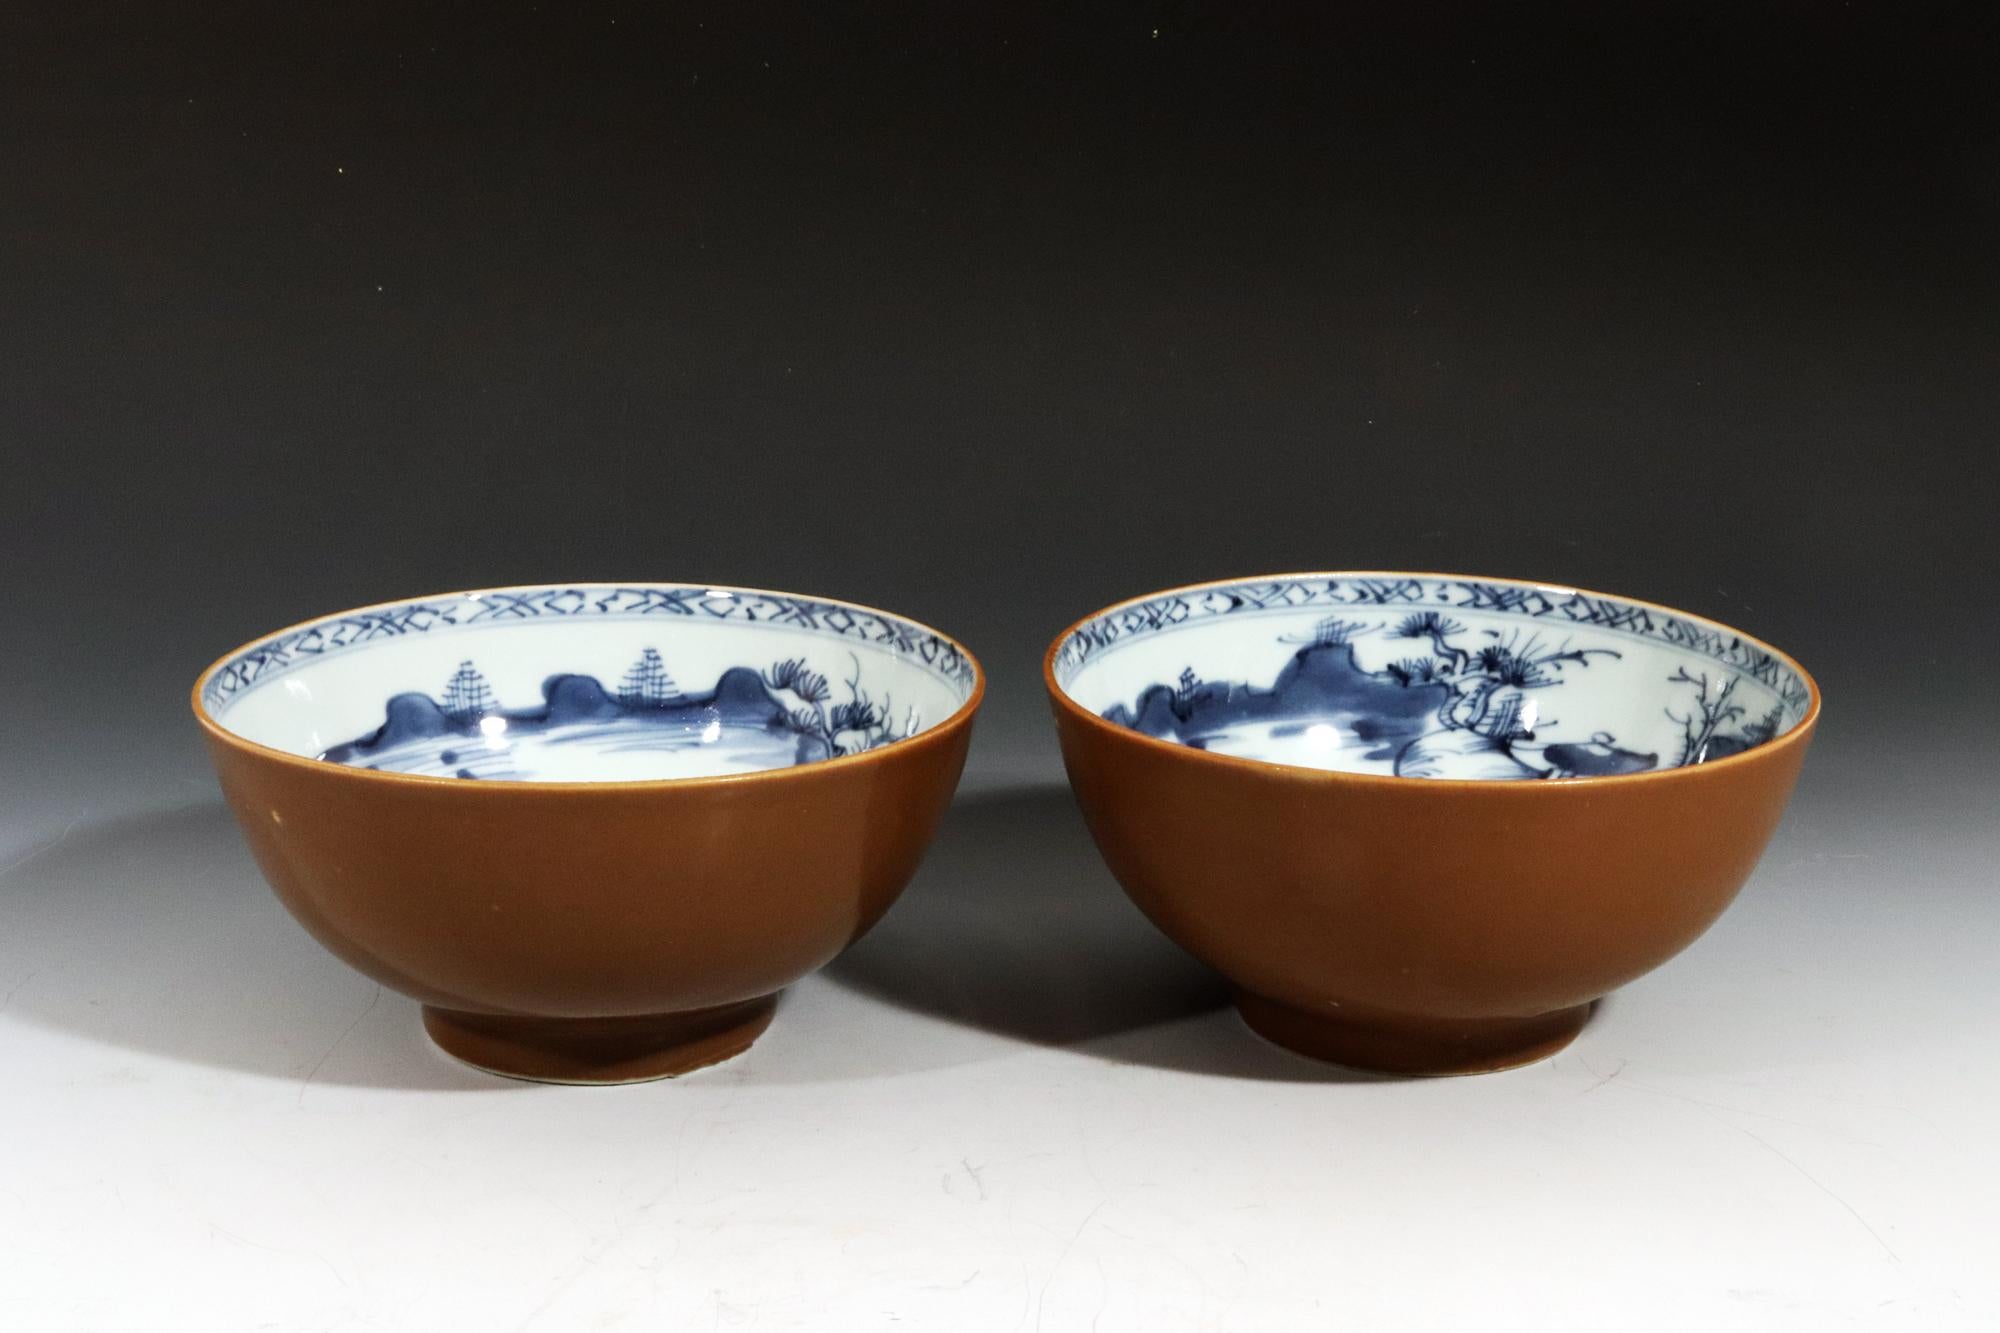 Nanking Cargo Chinese Export Porcelain Cafe au Lait and Blue Pair Bowls

The Chinese Export porcelain bowls are painted with a Cafe au Lait, Batavia-ware brown ground. The interiors are painted in underglaze blue with a wide scene that covers